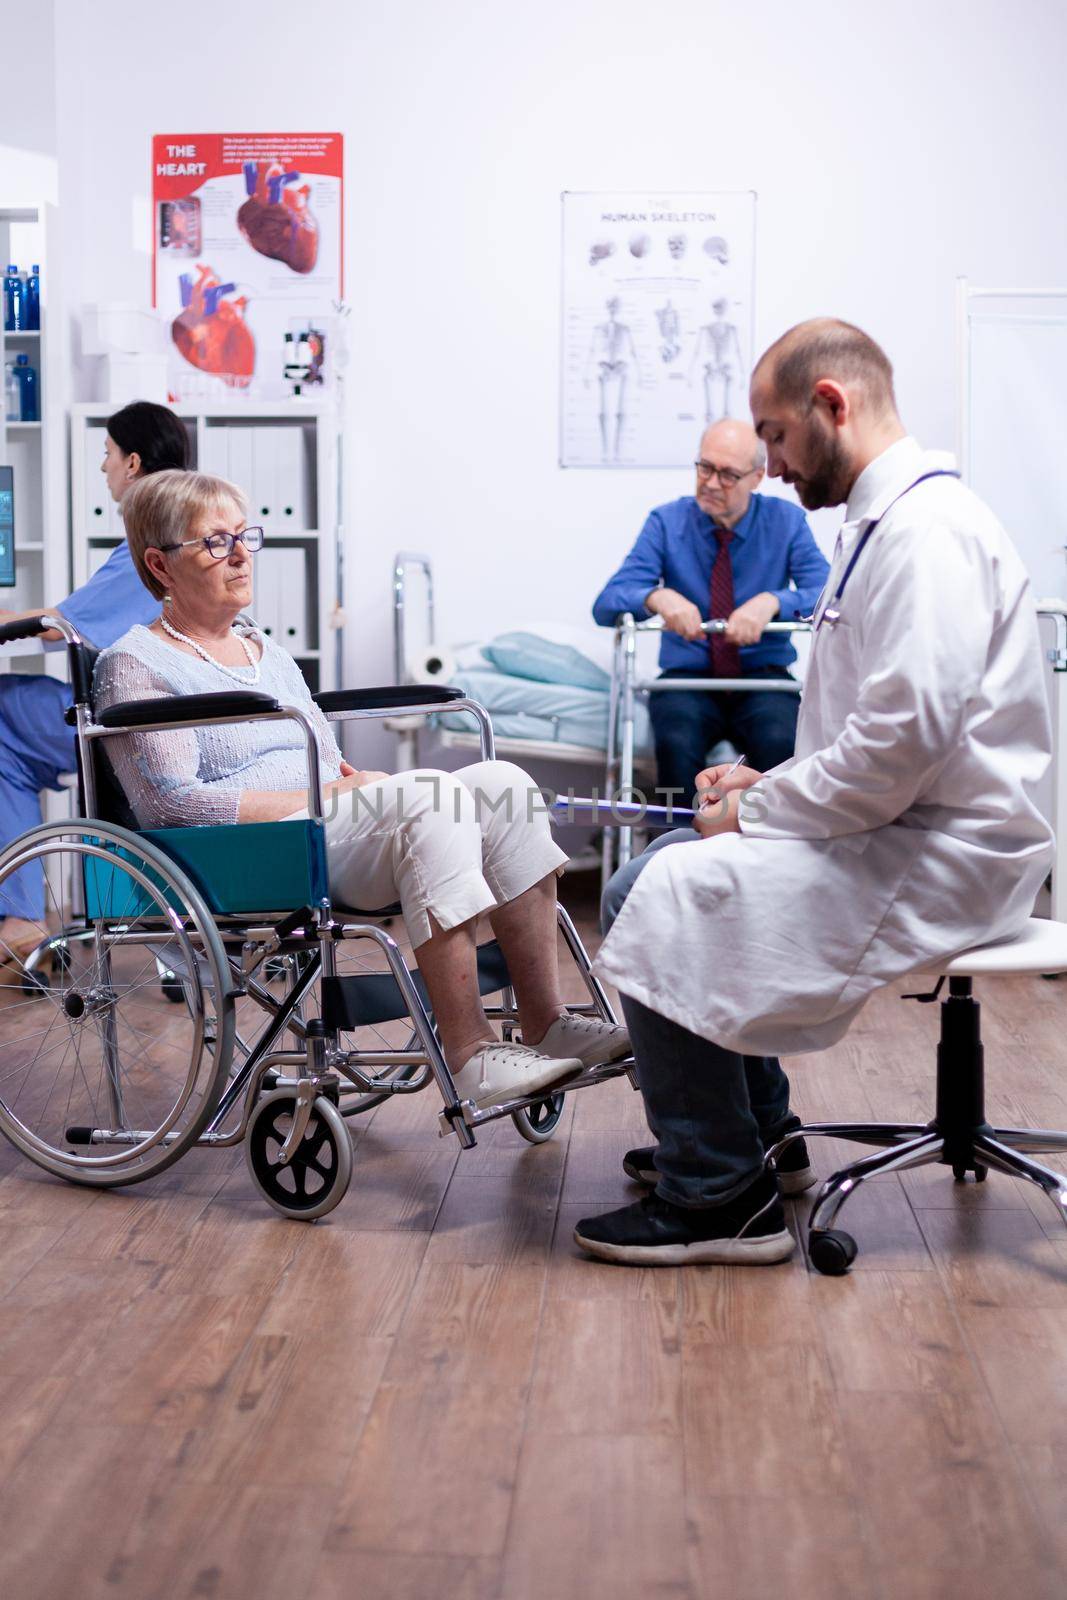 Disabled senior woman sittinf in wheelchair during medical consultation in recovery clinic. Man with disabilities ,walking frame sitting in hospital bed. Health care system, patients.